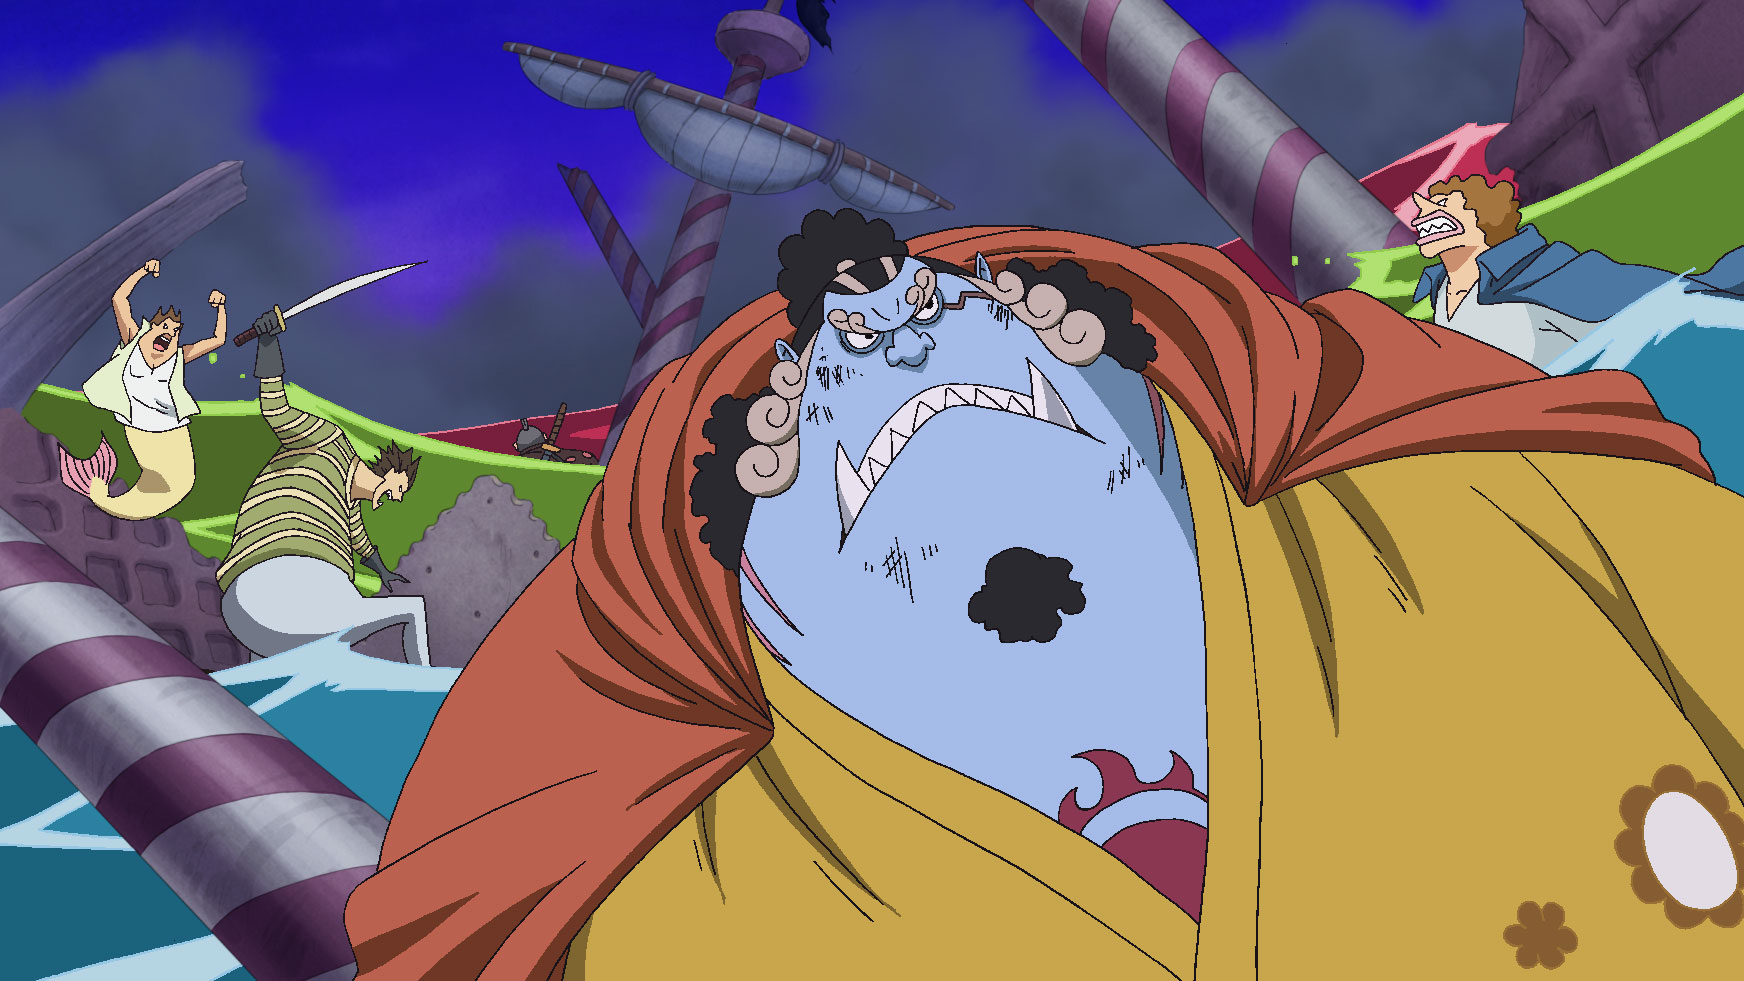 Parity One Piece Latest Episode 877 Full English Sub Up To 77 Off